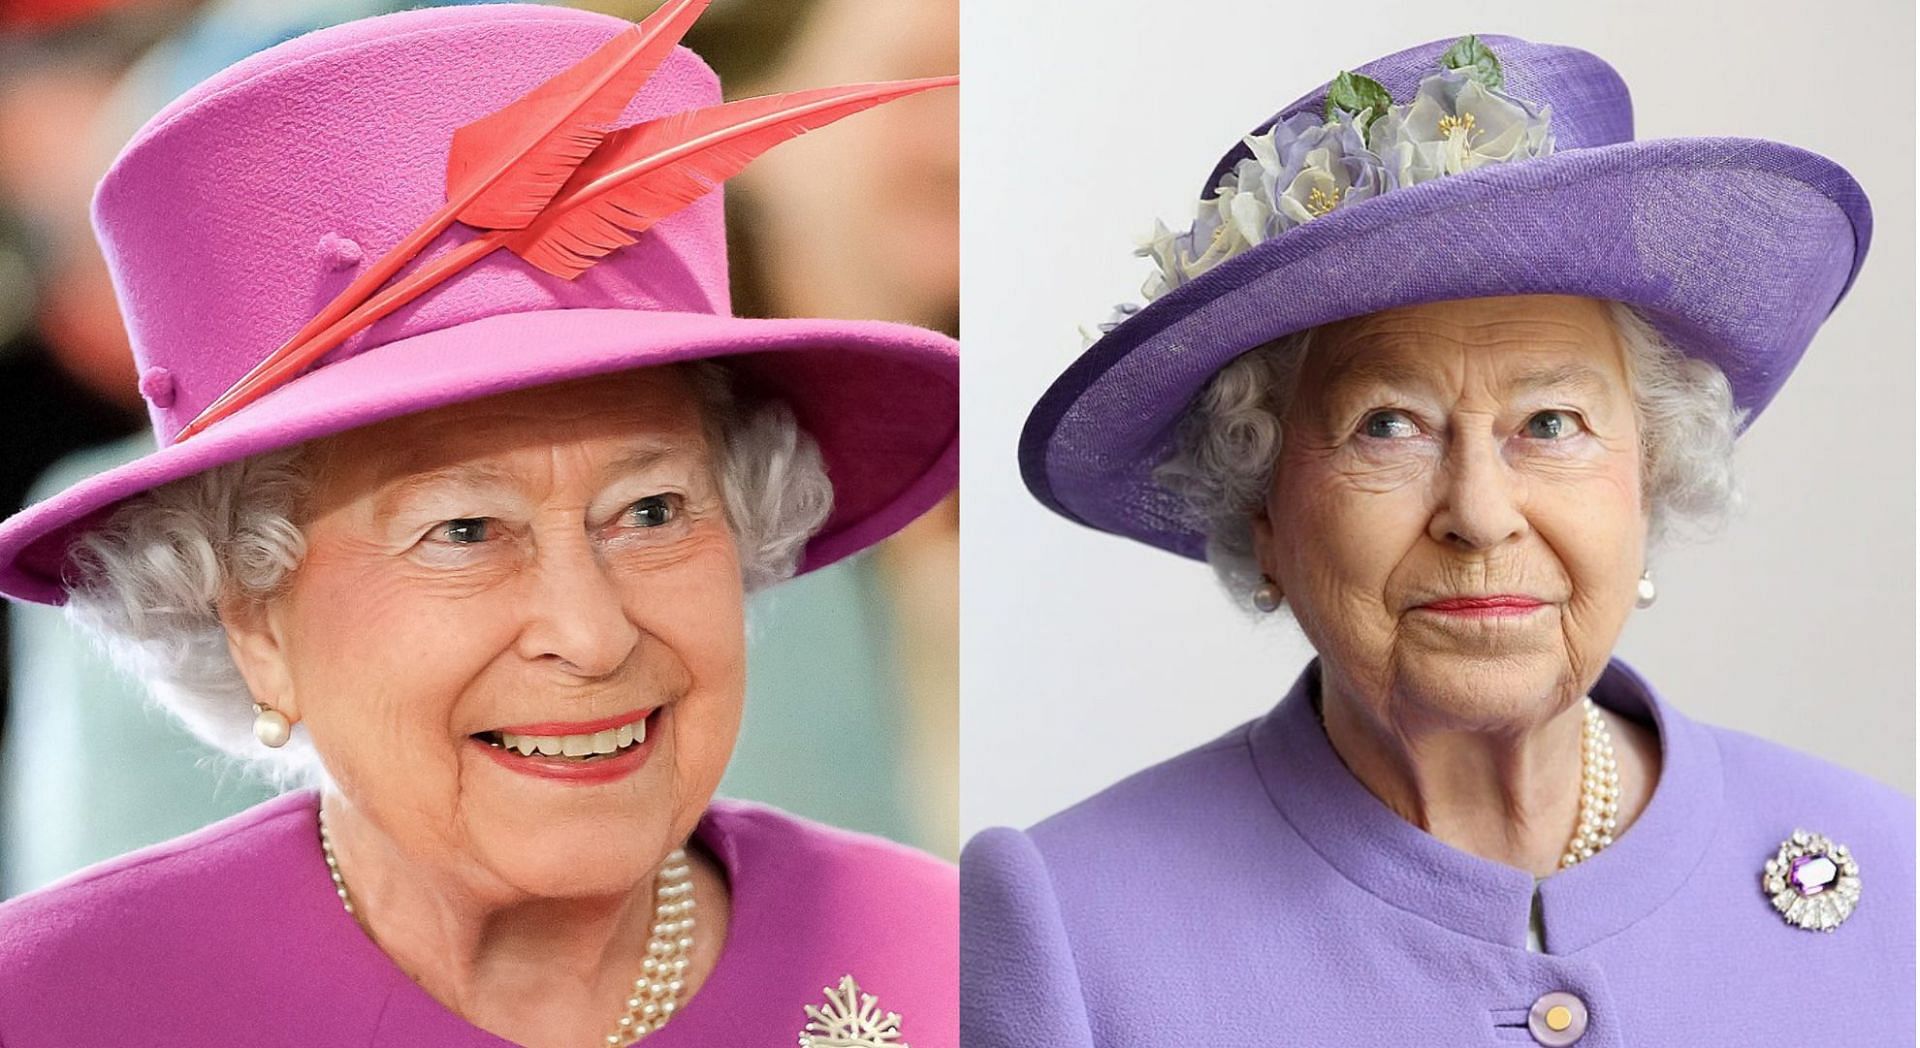 Queen Elizabeth II passed away at the age of 96 on September 8, 2022 (Image via Getty Images)